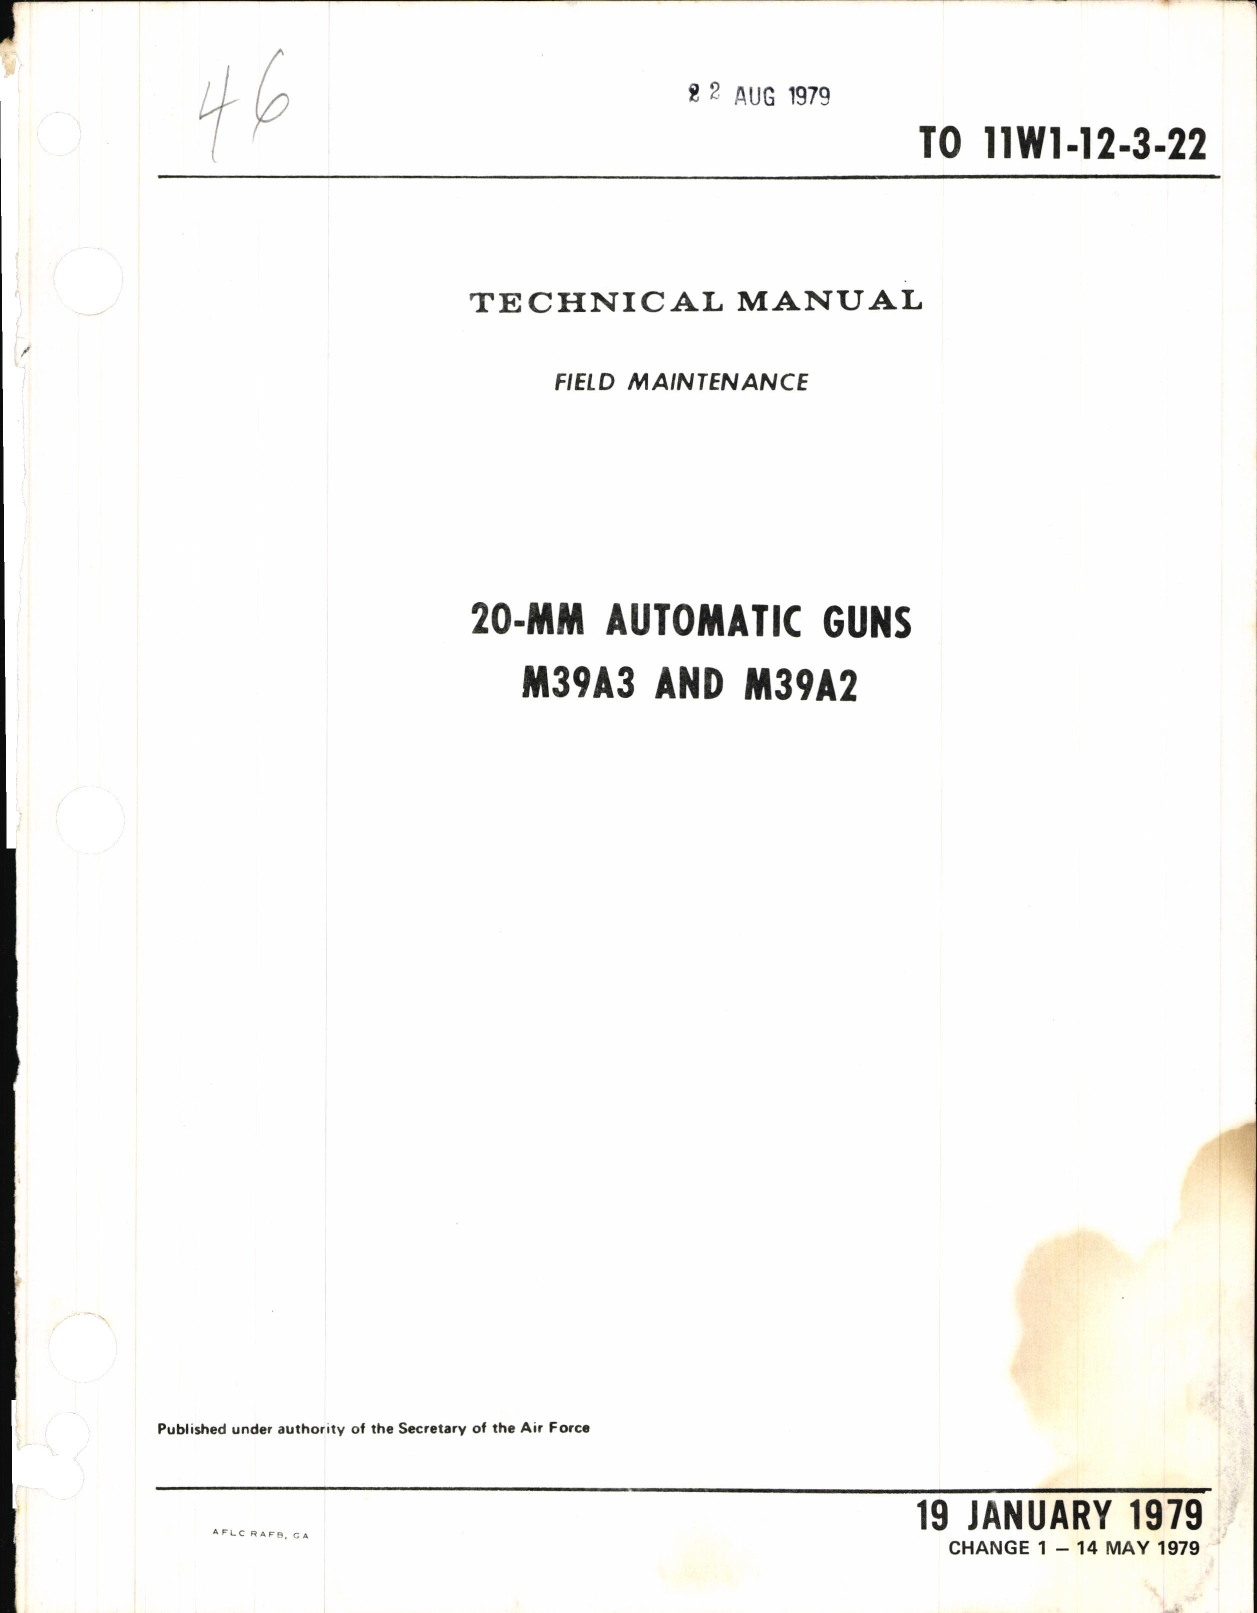 Sample page 1 from AirCorps Library document: Field Maintenance for 20-MM Automatic Guns M39A3 and M39A2